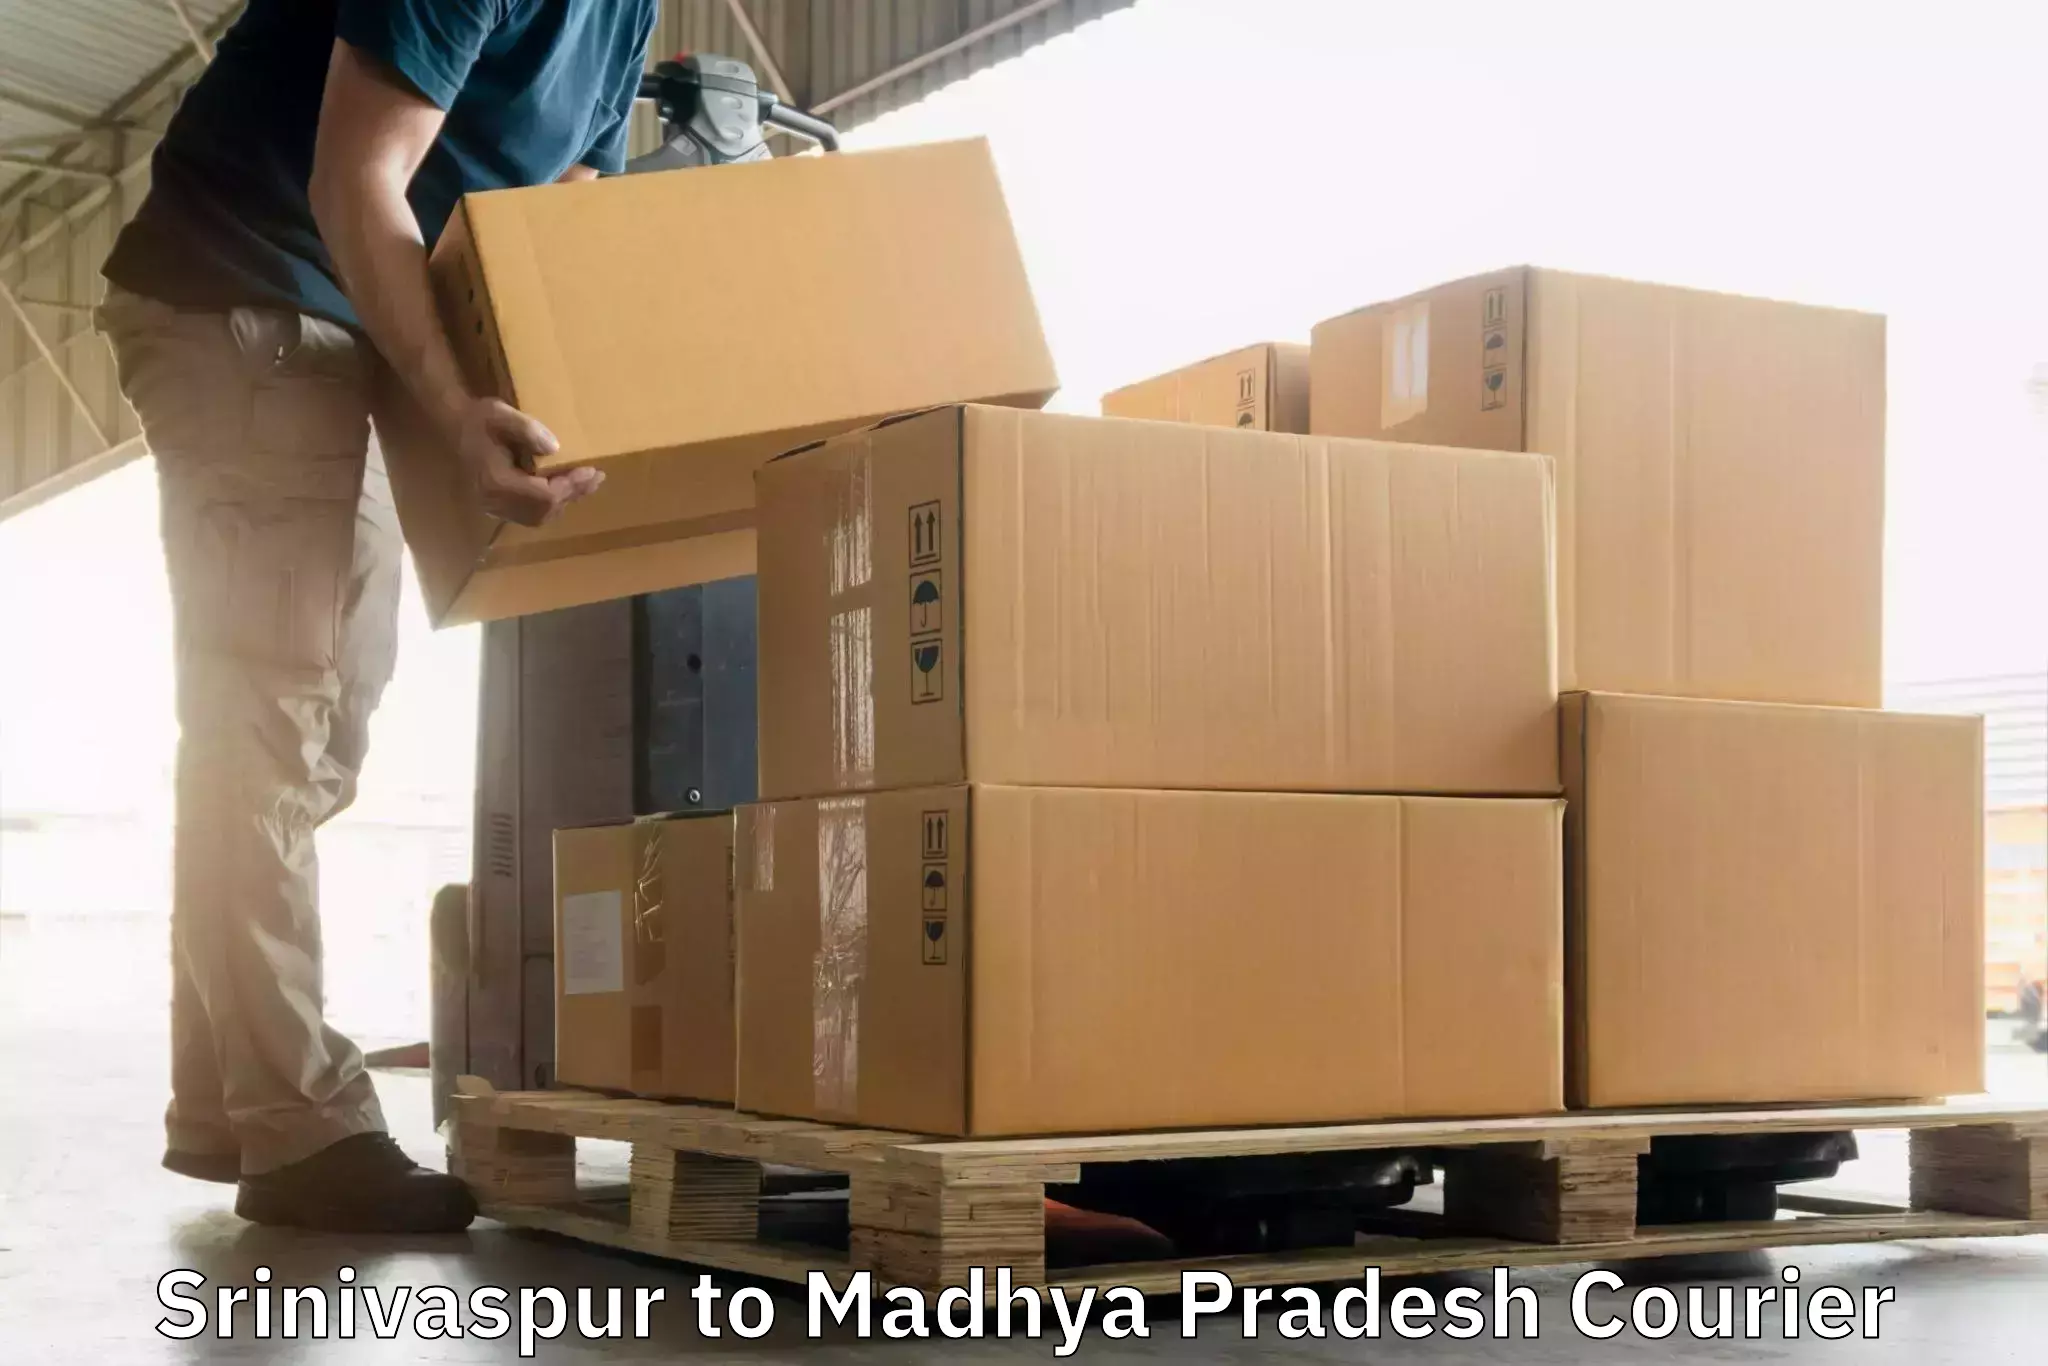 Courier service booking Srinivaspur to Pithampur